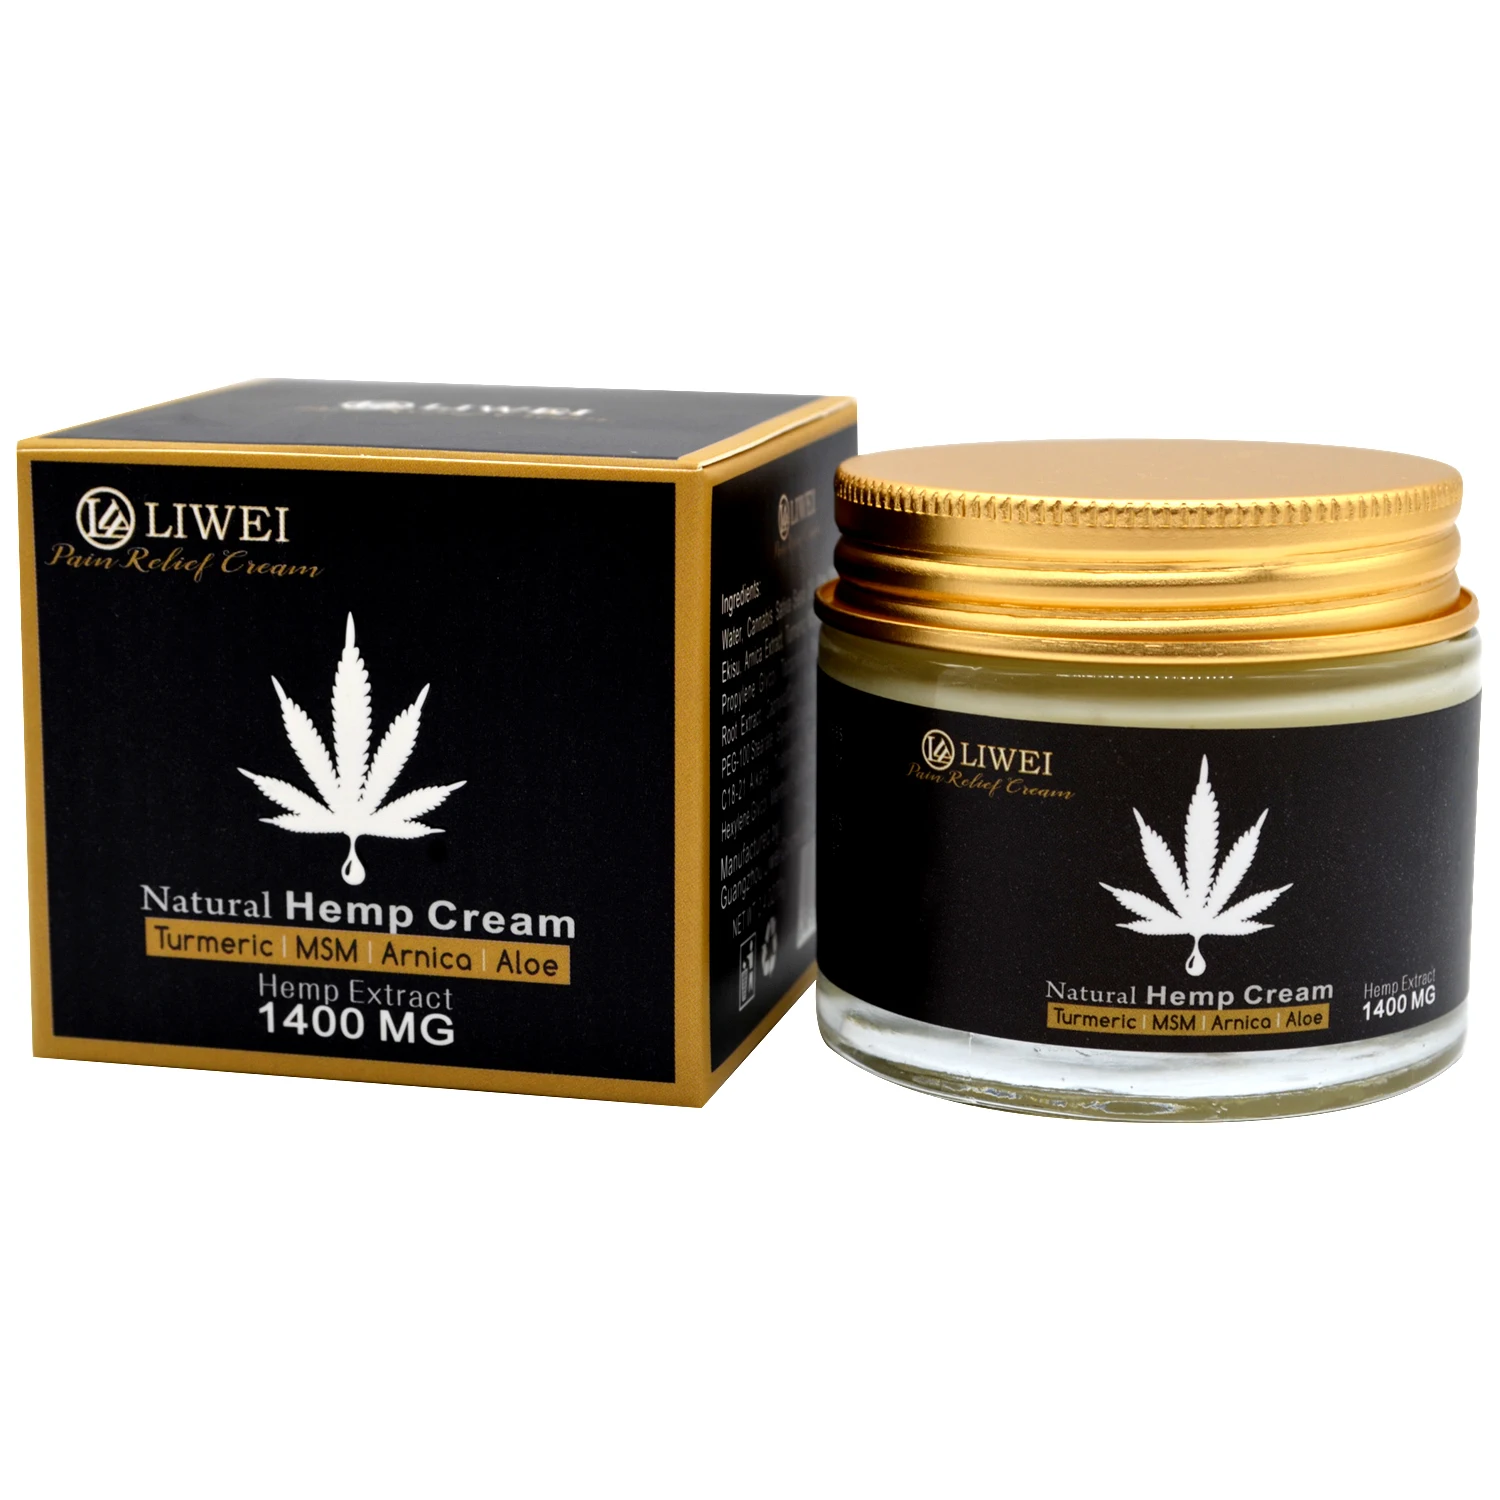 

2019 Amazon Hot Sale Moisturizing Firming Pure CBD Oil Extract Hemp Pain Relief Cream for Face and Body Care, Licency, pale yellow